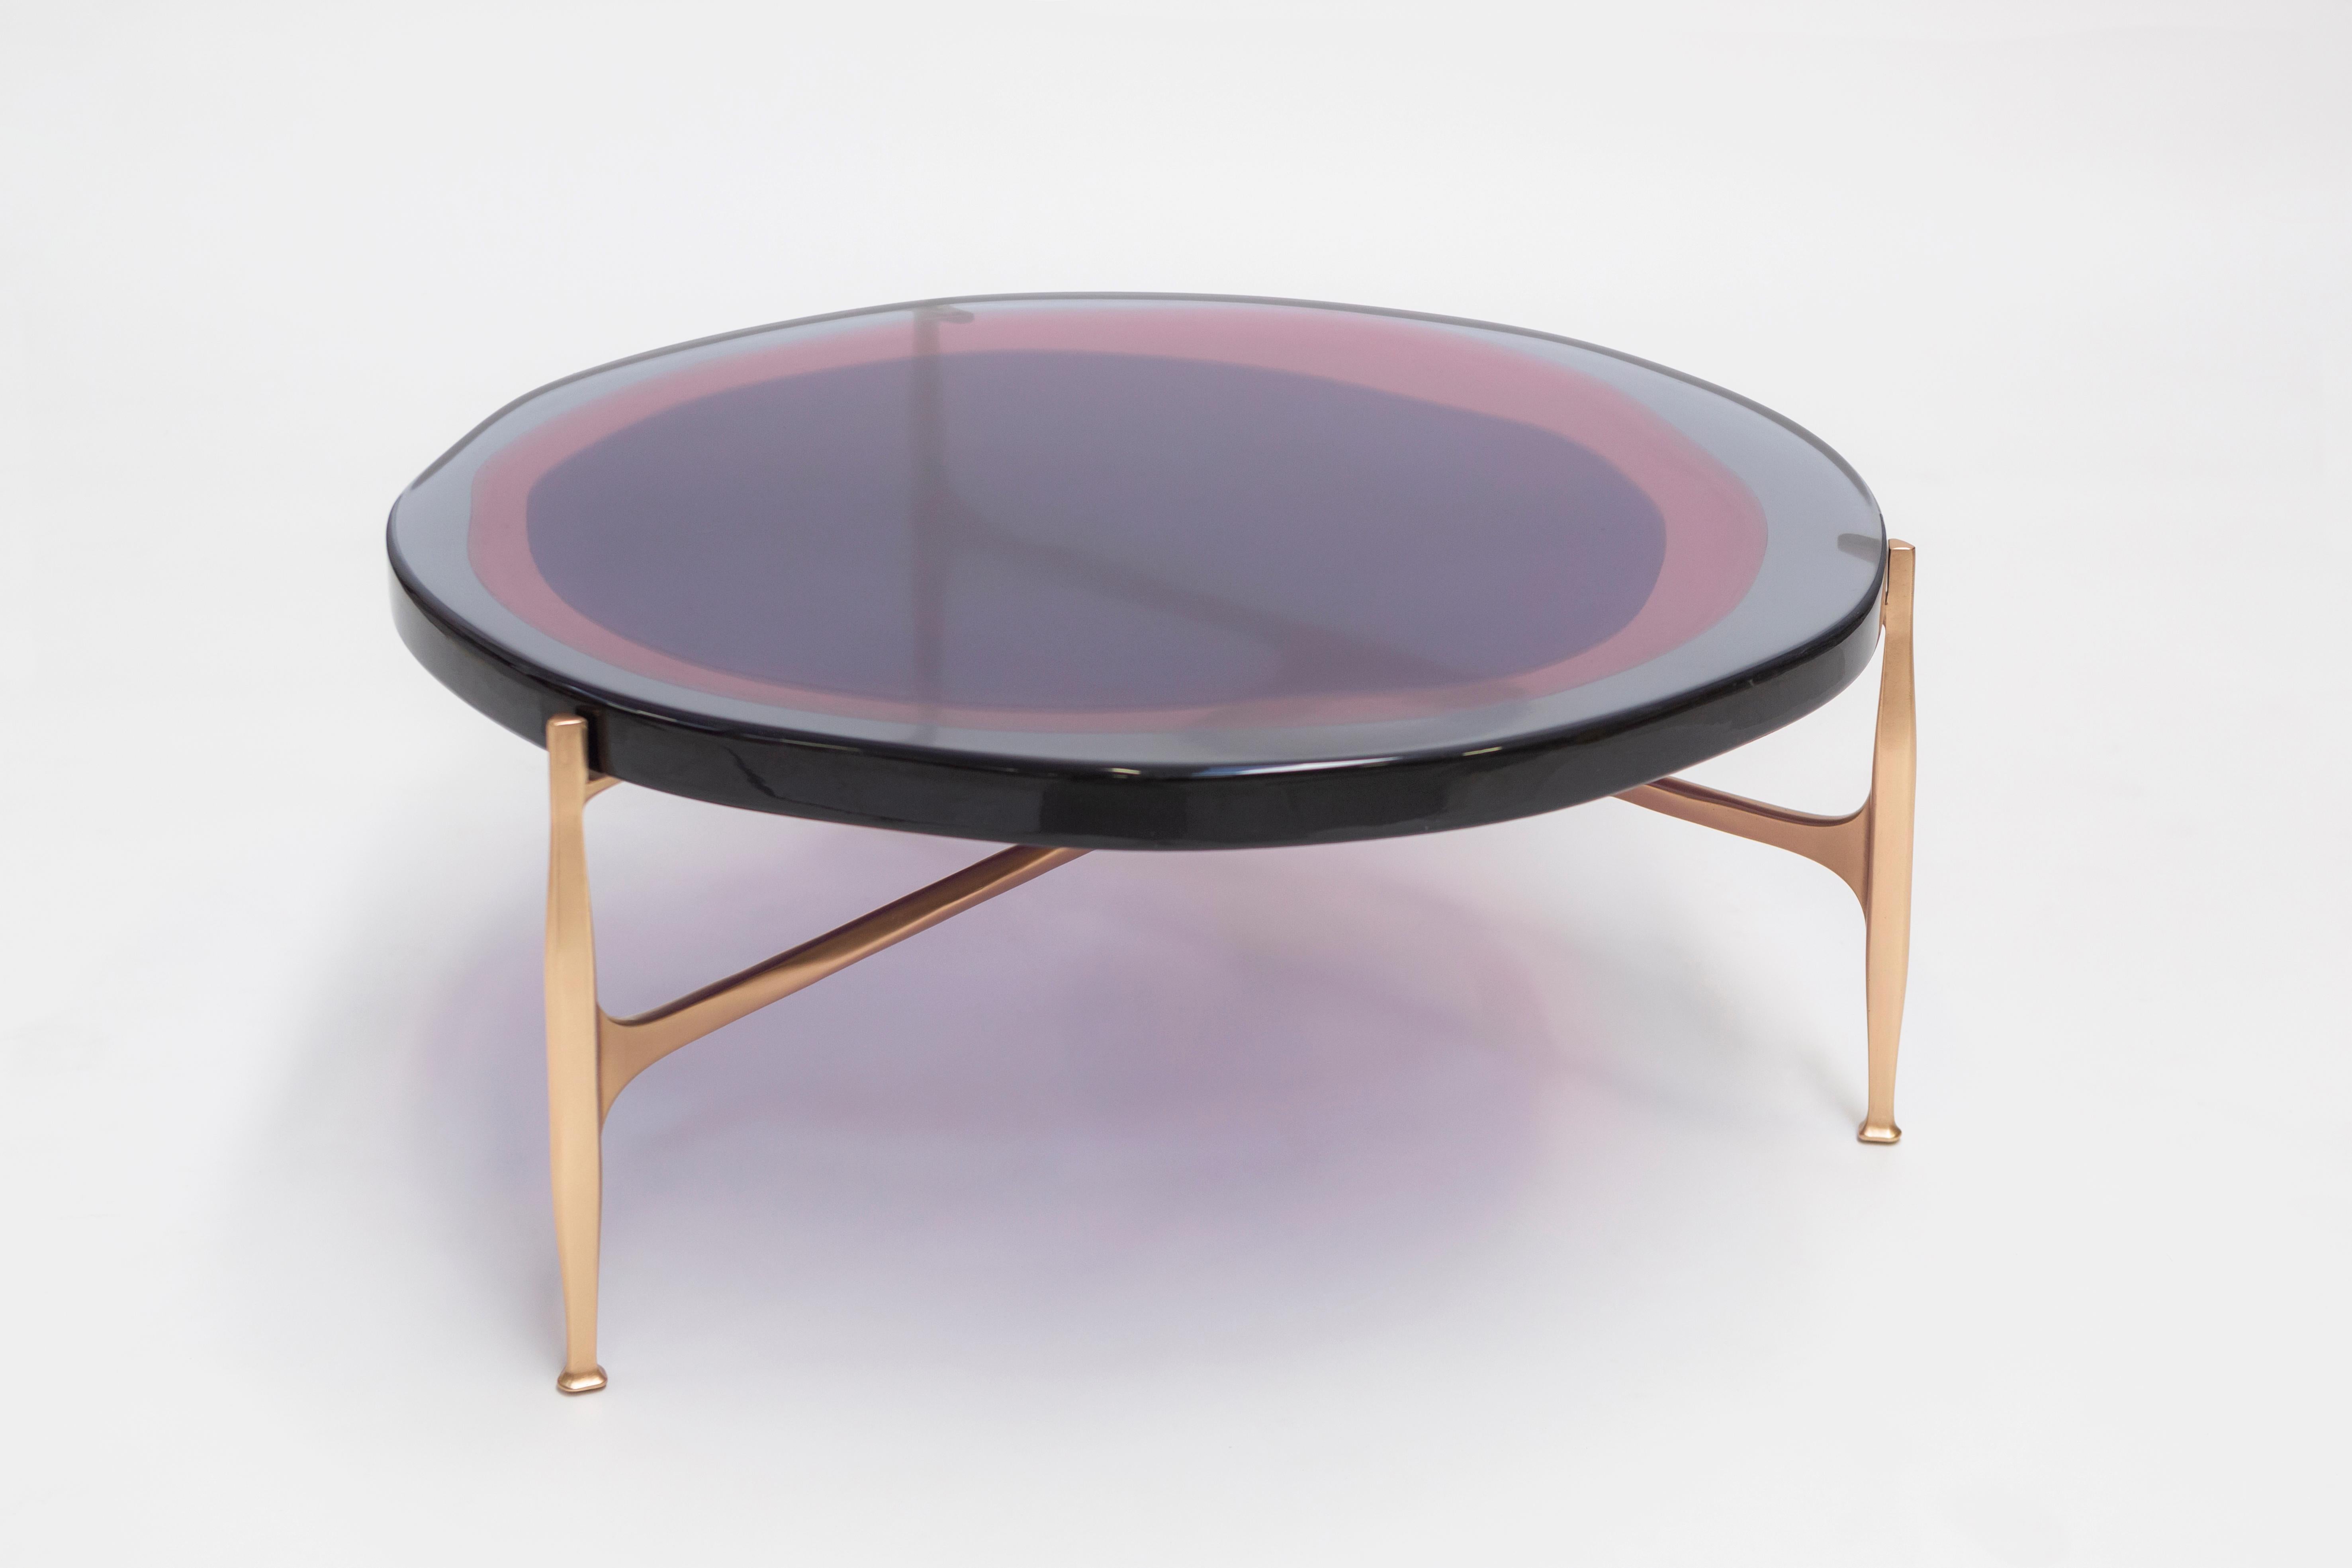 Agatha coffee table by Draga & Aurel
Dimensions: W 90 x D 90 x H 36
 Top Ø 90 cm
Materials: Resin and bronze

The Agatha coffee tables are featured by irregular circular tops of transparent and
colorful resin sit on a bronze frame with a